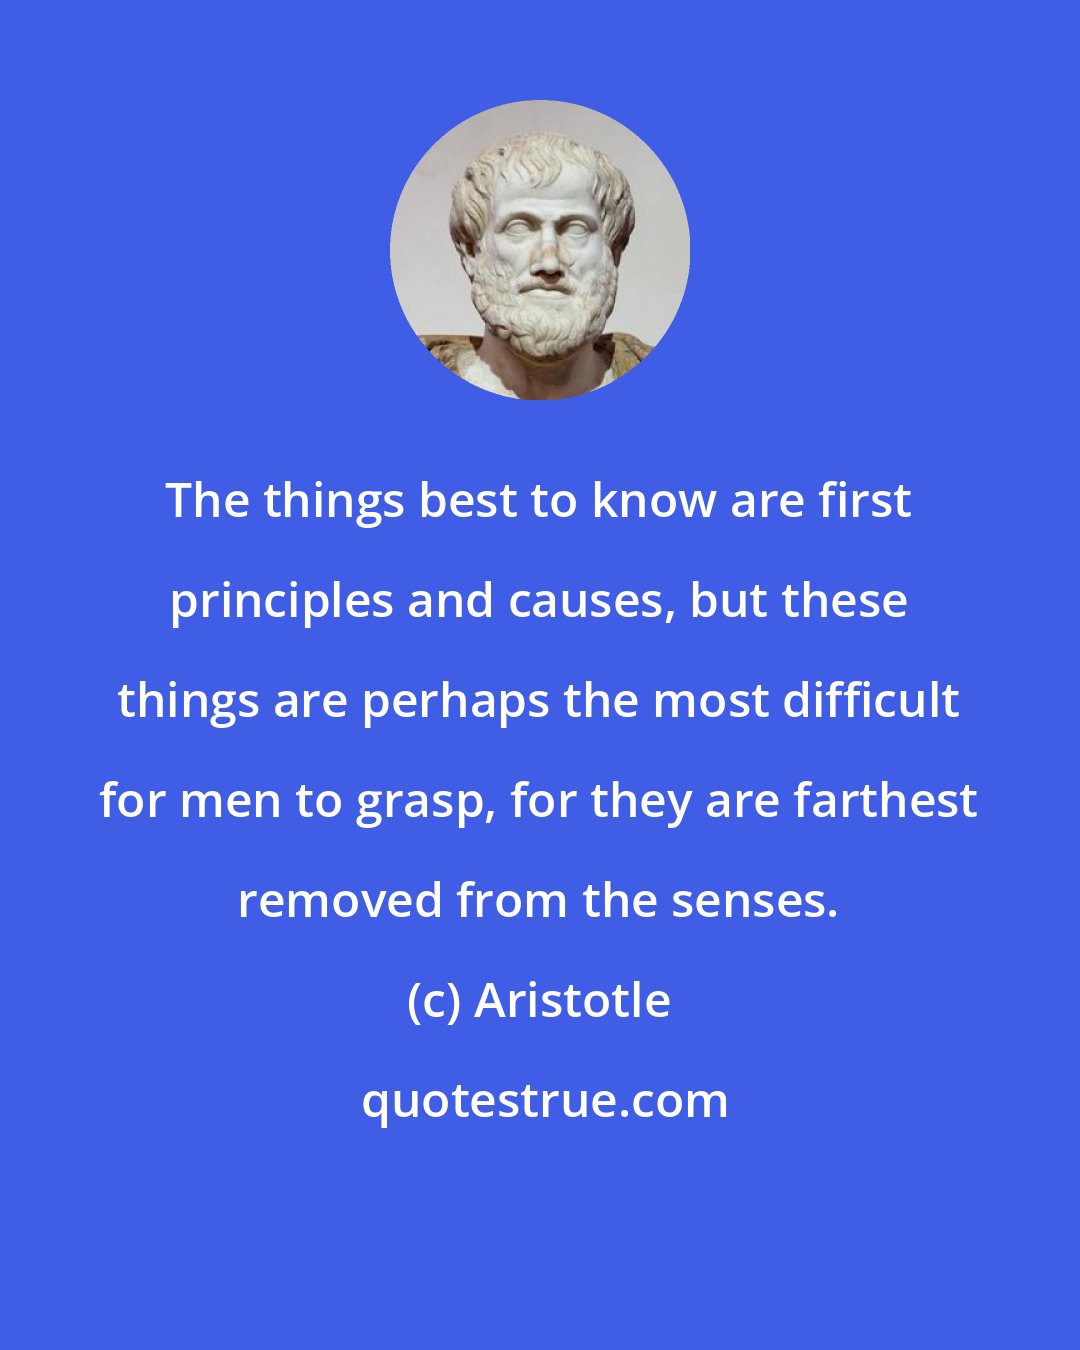 Aristotle: The things best to know are first principles and causes, but these things are perhaps the most difficult for men to grasp, for they are farthest removed from the senses.